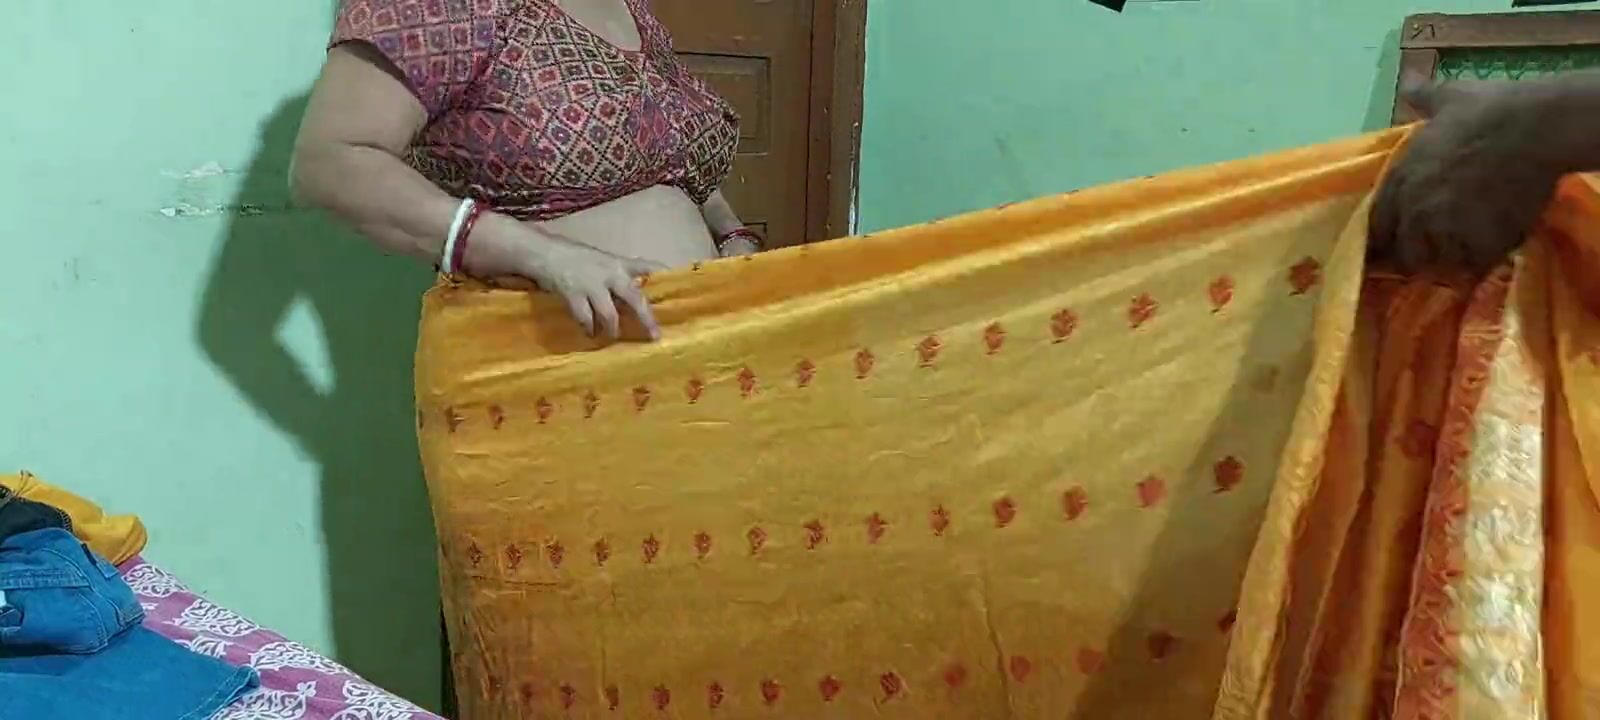 Today Salu Bhabhi was looking hot in a yellow saree pic